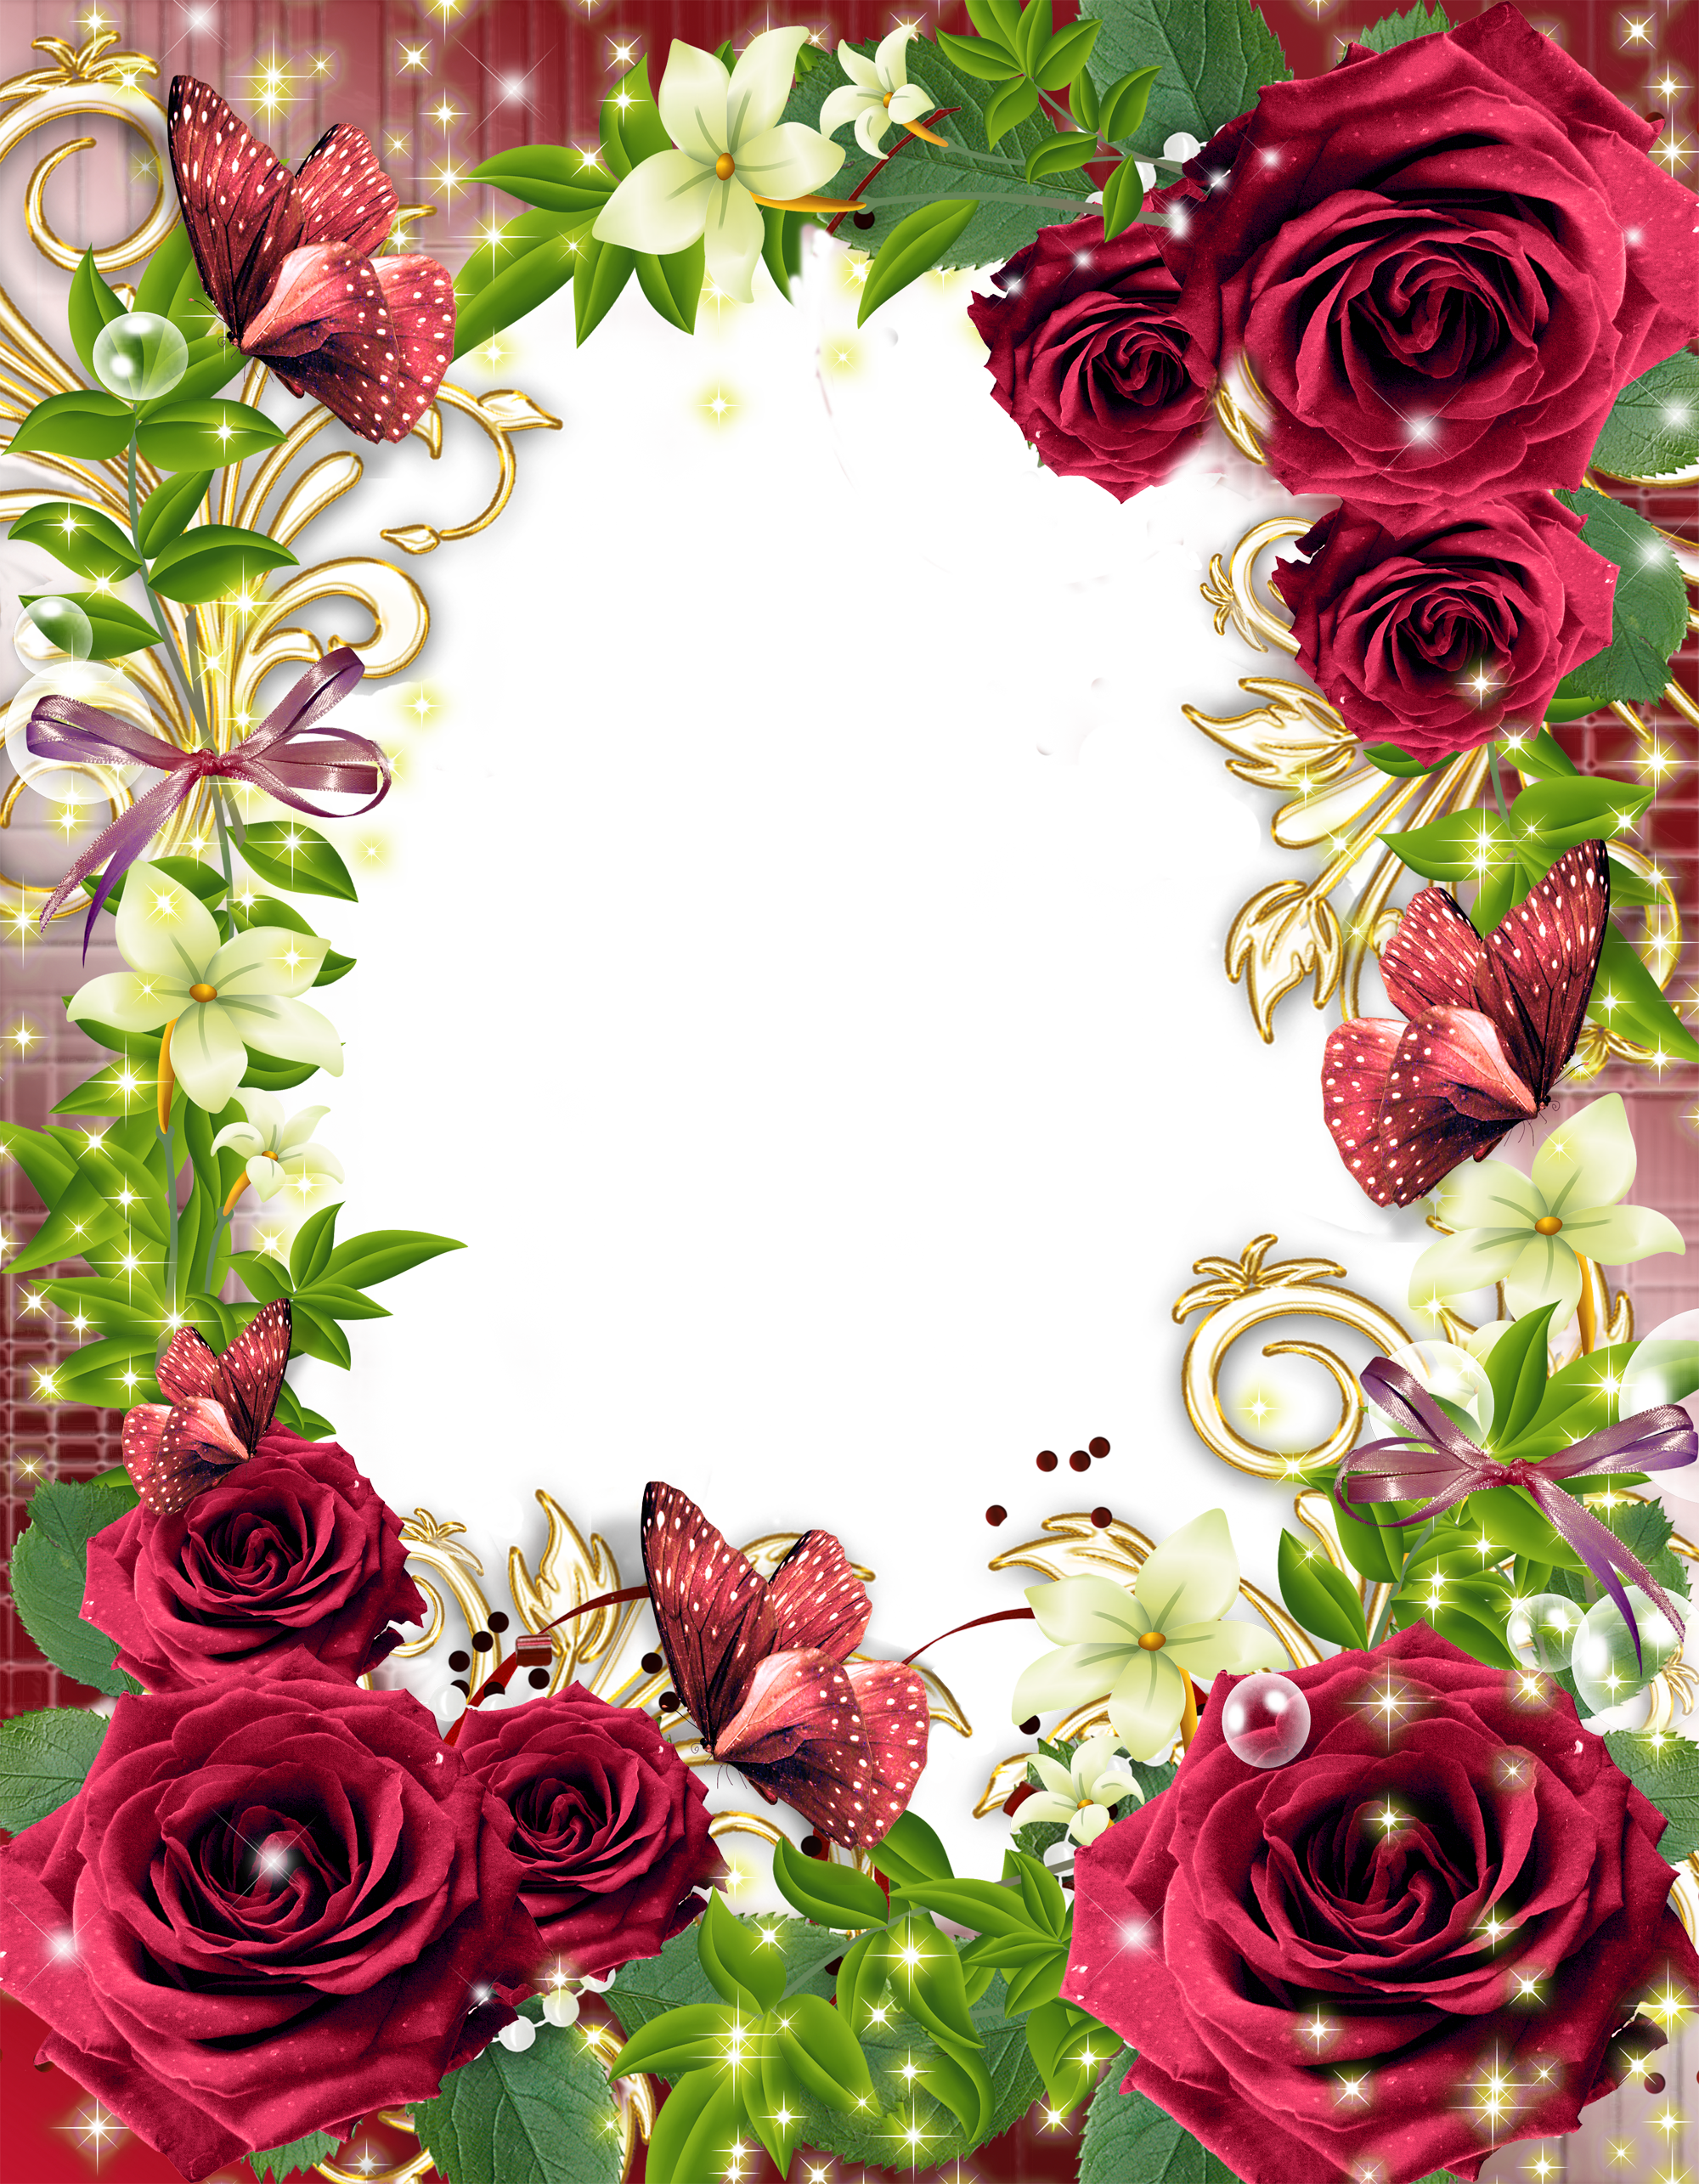 Transparent PNG Photo Frame with Red Roses | Gallery ...